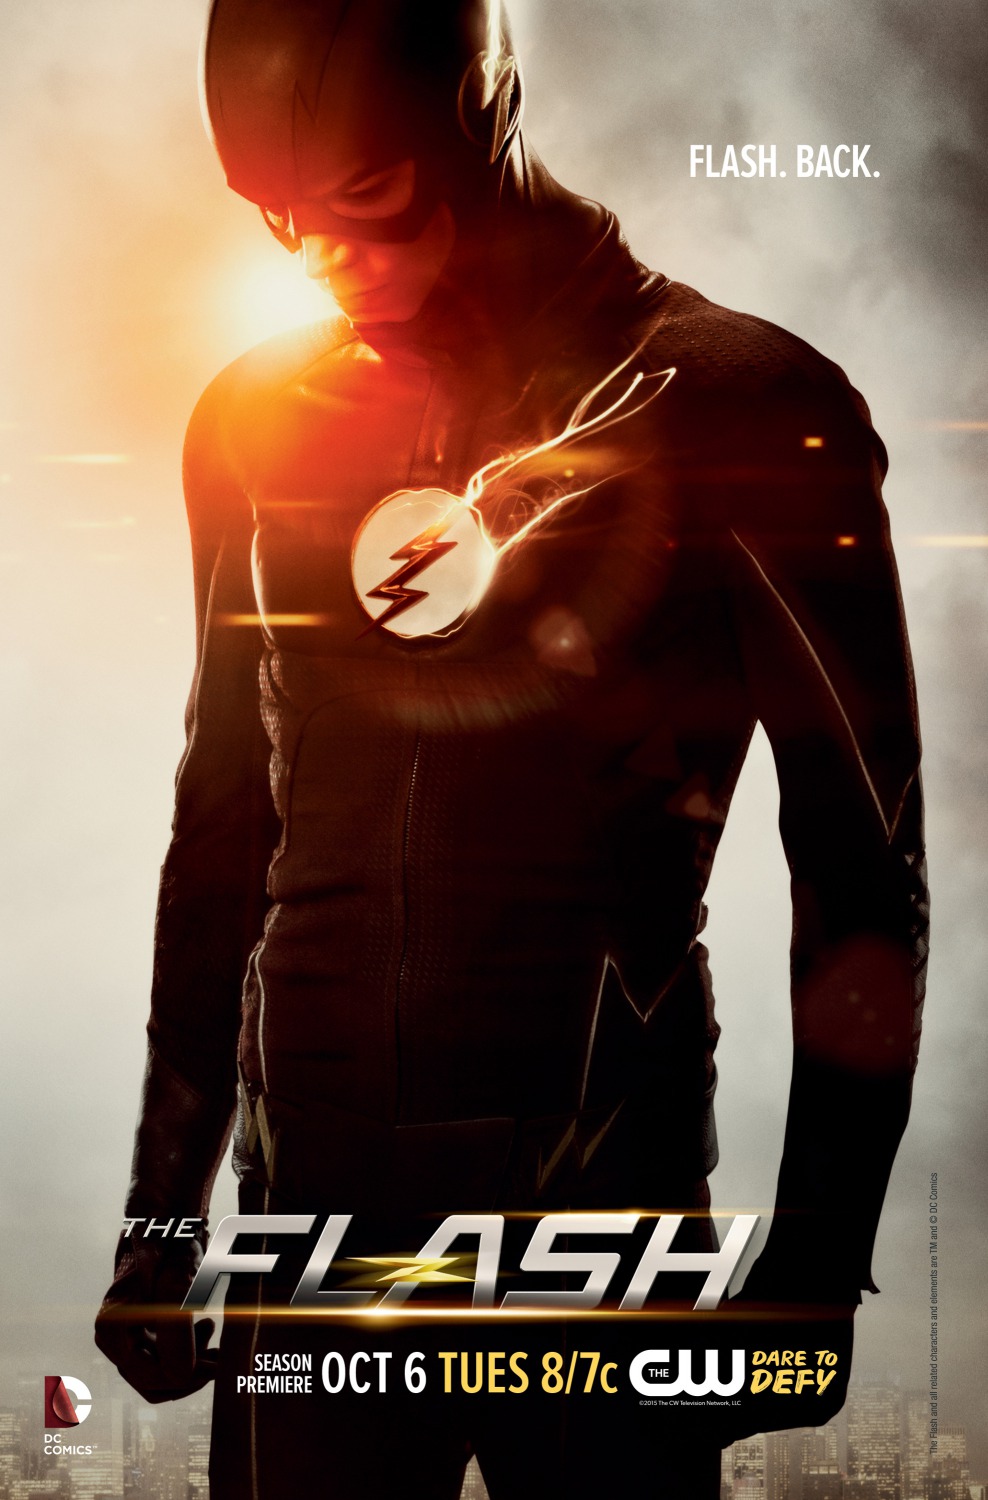 The Flash (#14 of 40): Extra Large Movie Poster Image ...